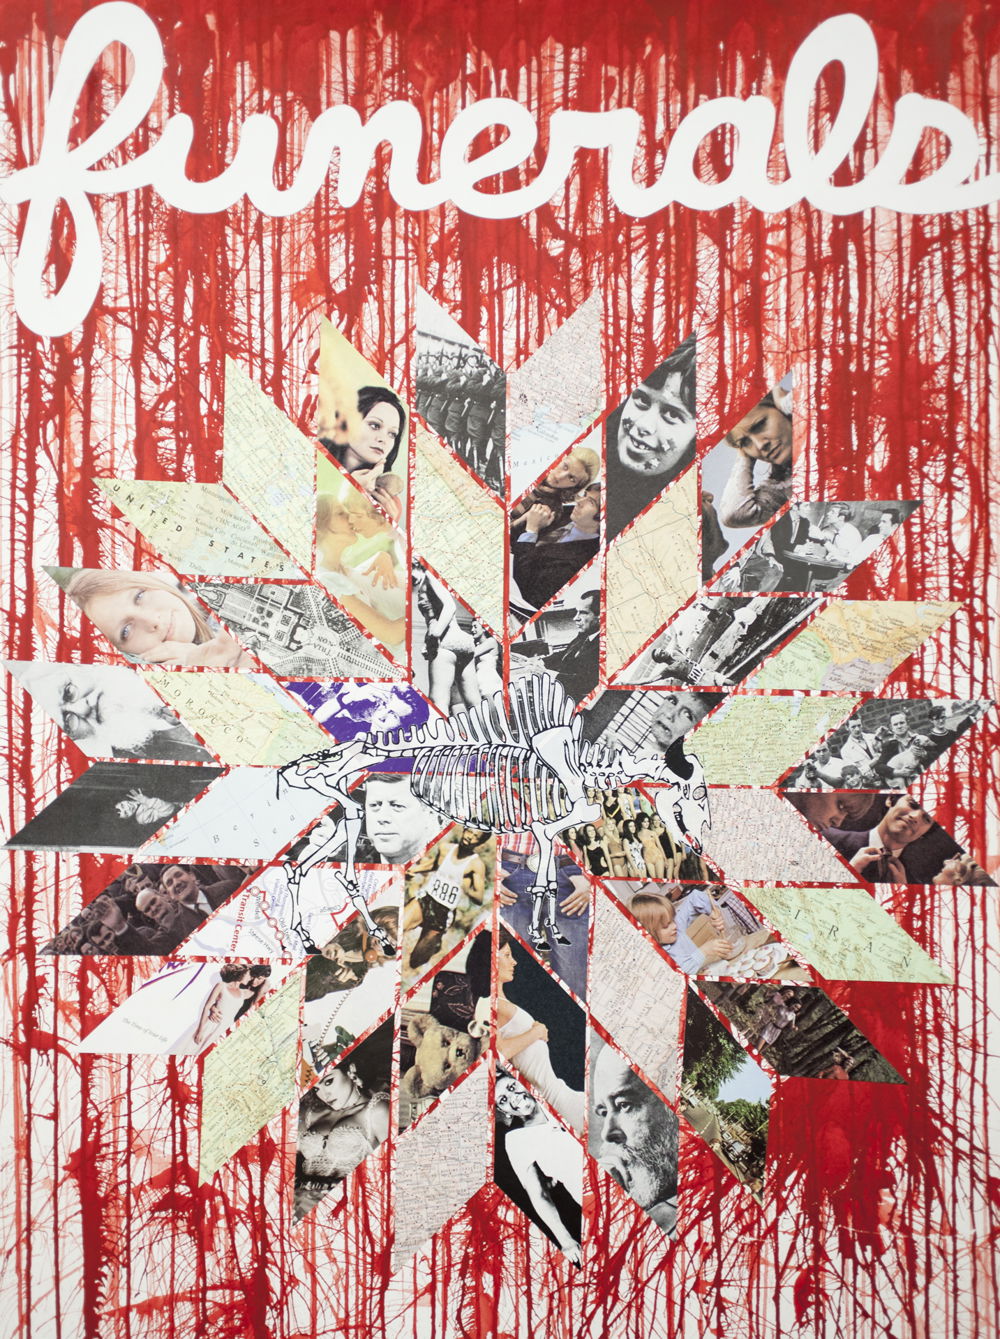 A multimedia collage composed of images of people, maps, and buildings cut into diamond shapes and arranged into an 8 pointed star that radiates outward. At the center of the star is the skeleton of a buffalo. The background is red splattered paint. The word “funerals” is painted in white cursive at the top.